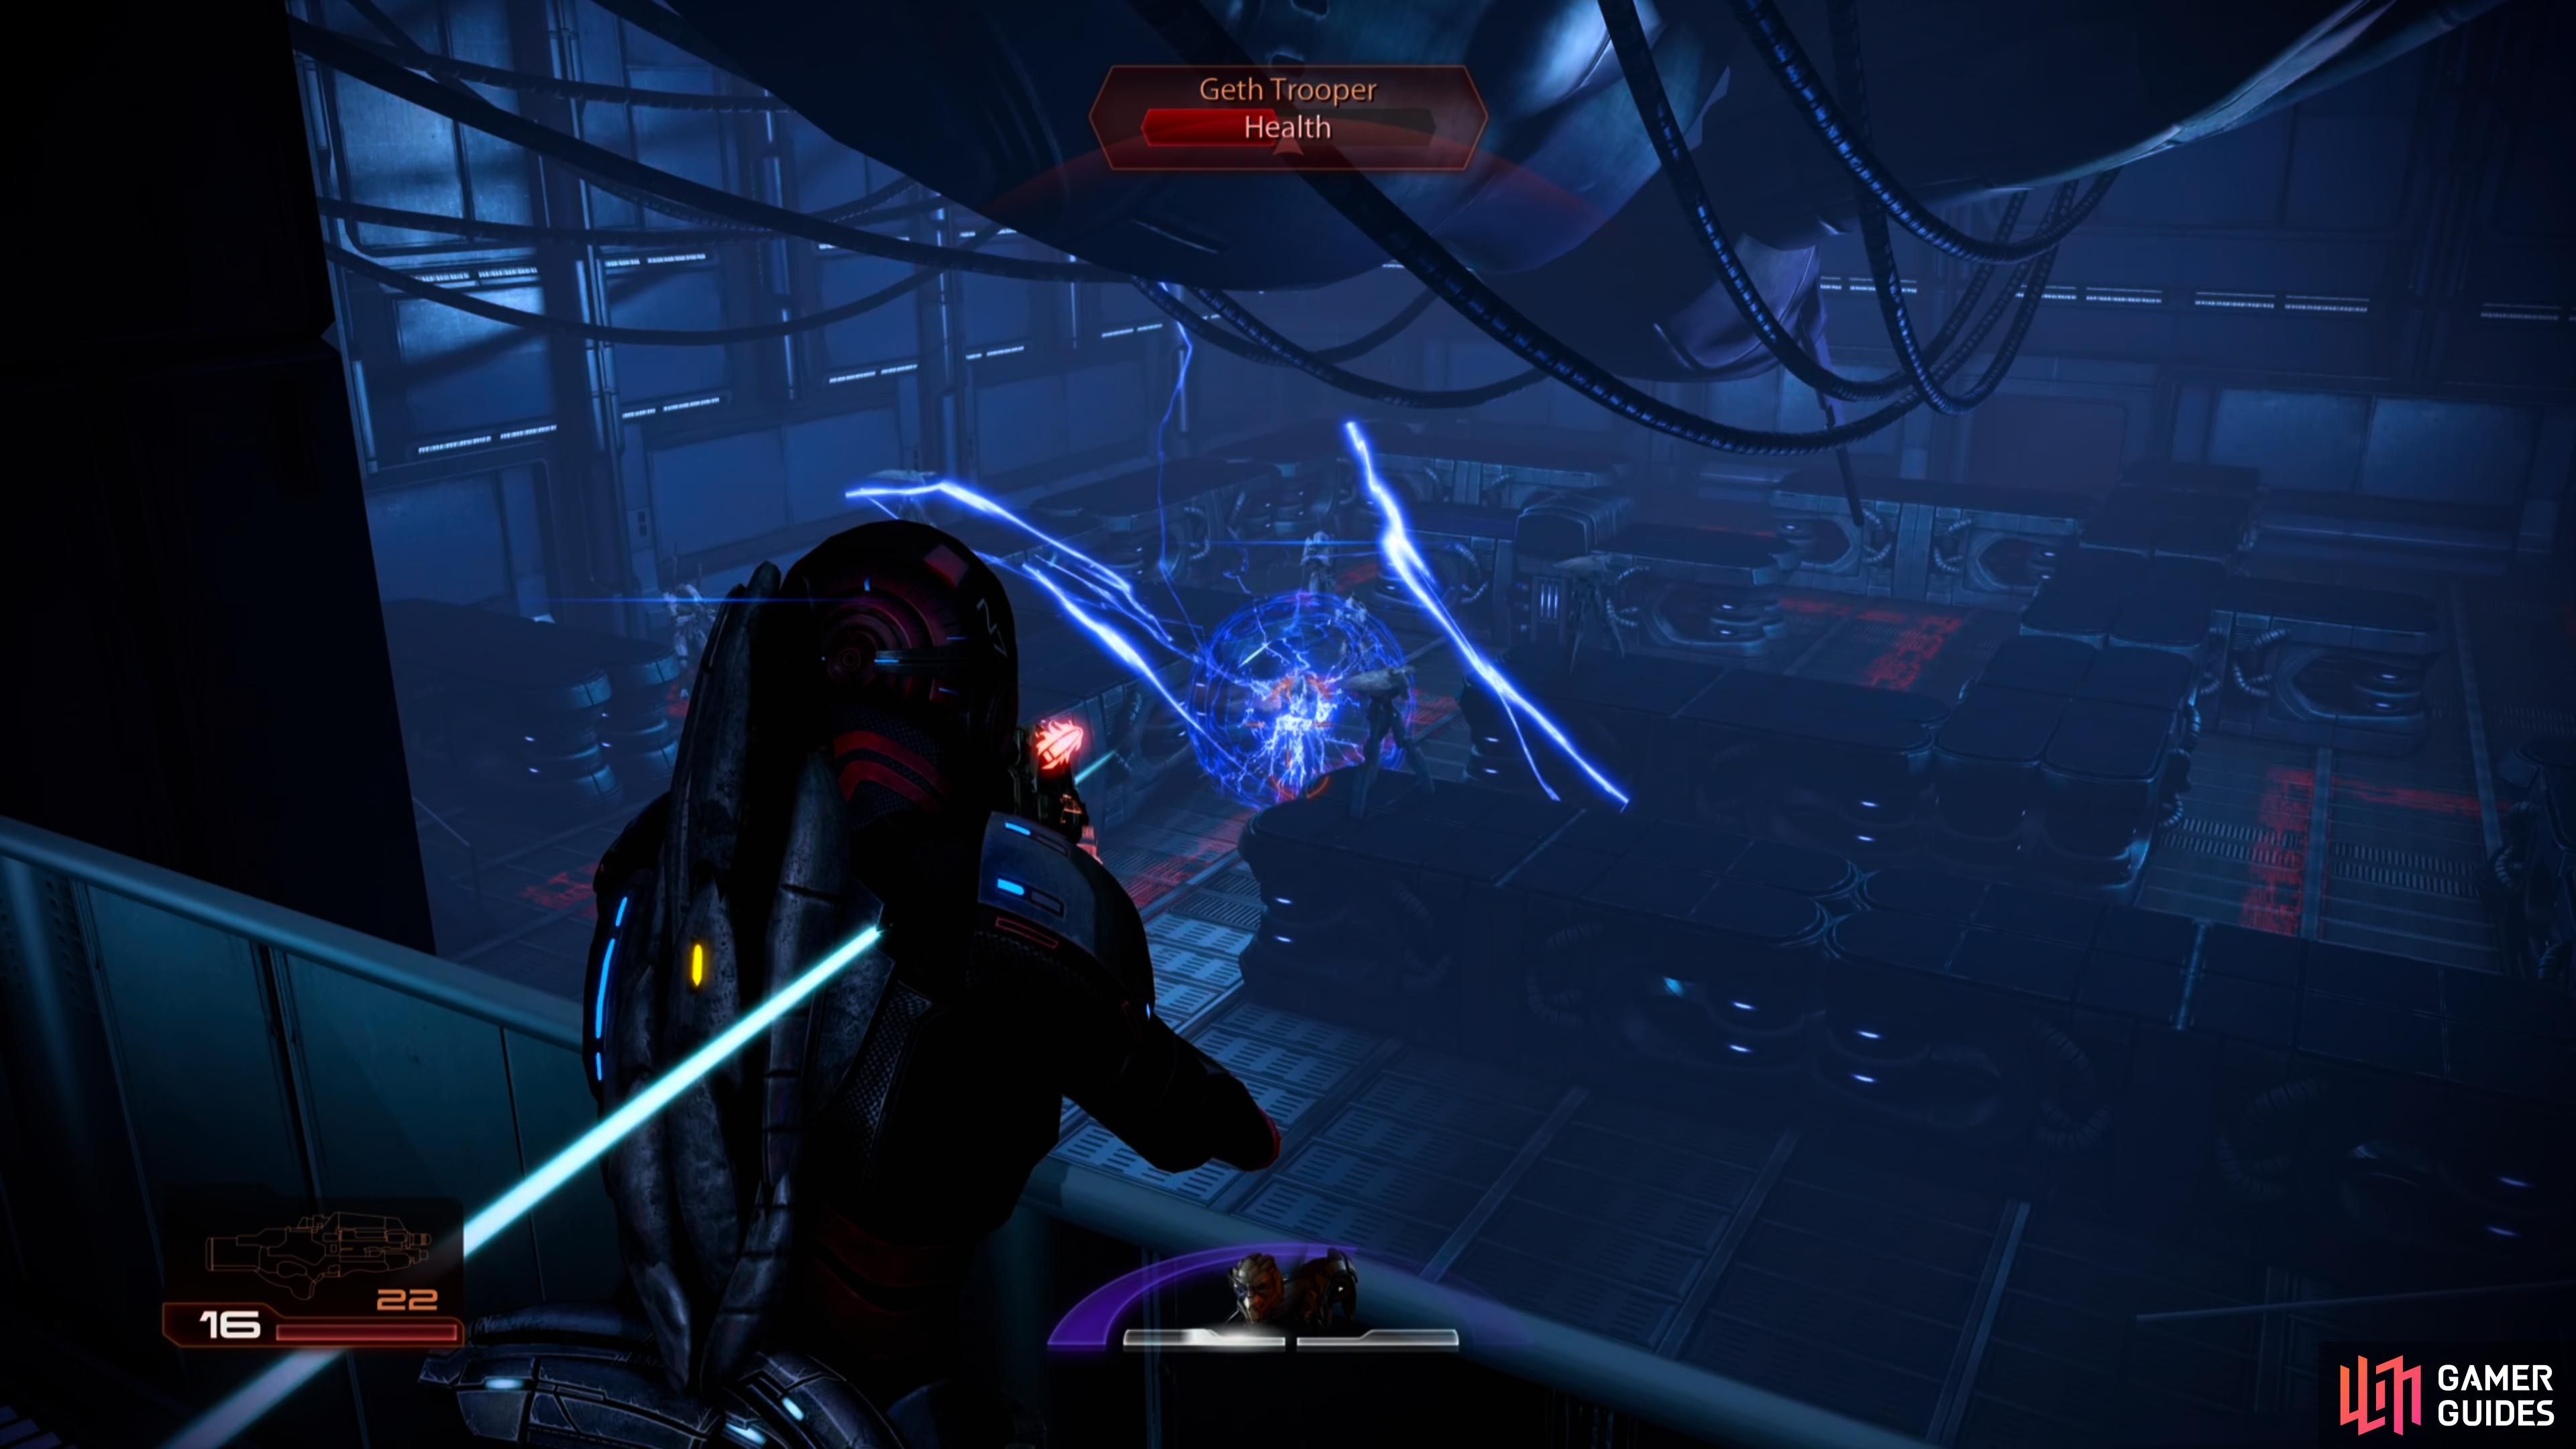 Use abilities (especially Overload and AI Hacking) and commandeer turrets to delay or destroy advancing geth.